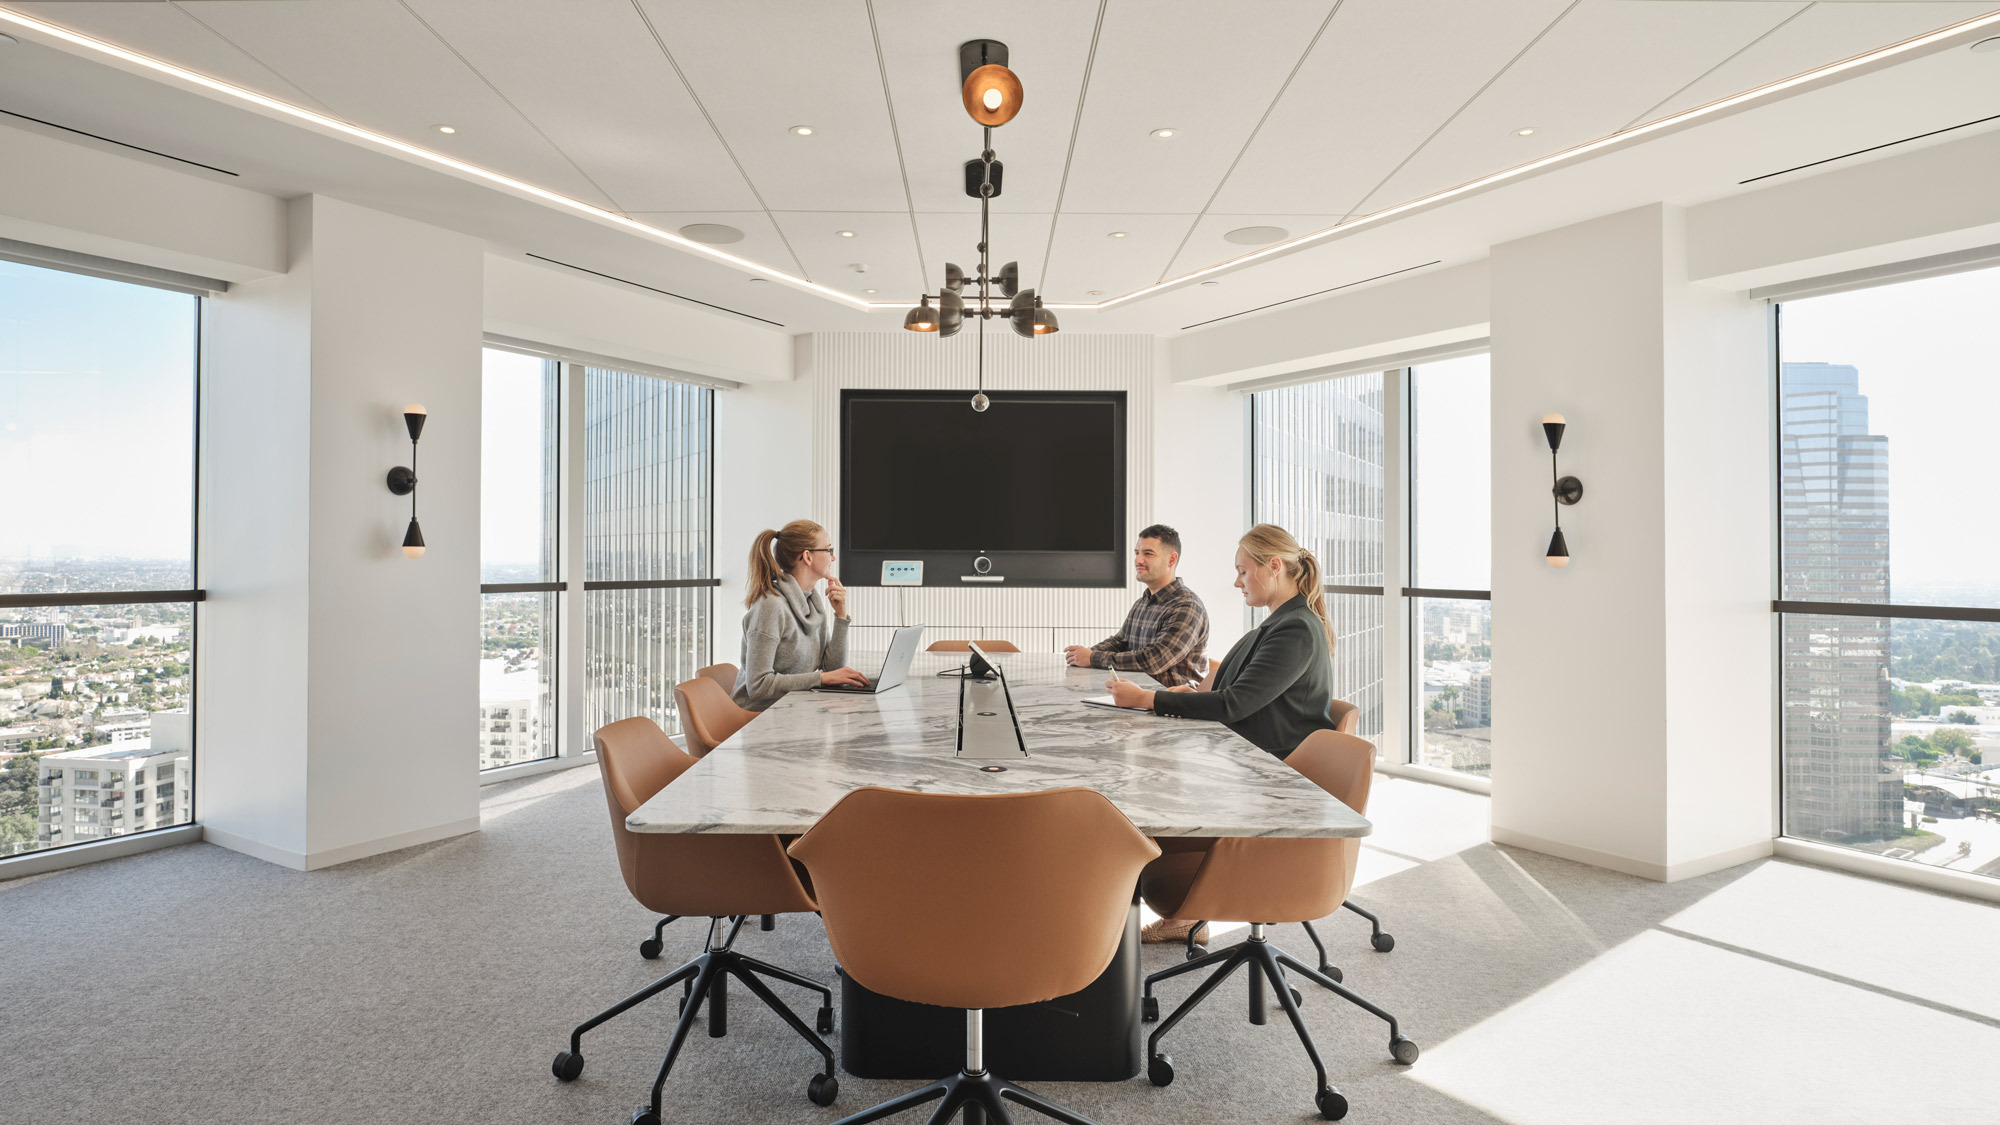 Modern conference room featuring a sleek, oval marble table surrounded by mid-century style chairs, against panoramic windows showcasing city views, complemented by recessed and pendant lighting, with a minimalist aesthetic.